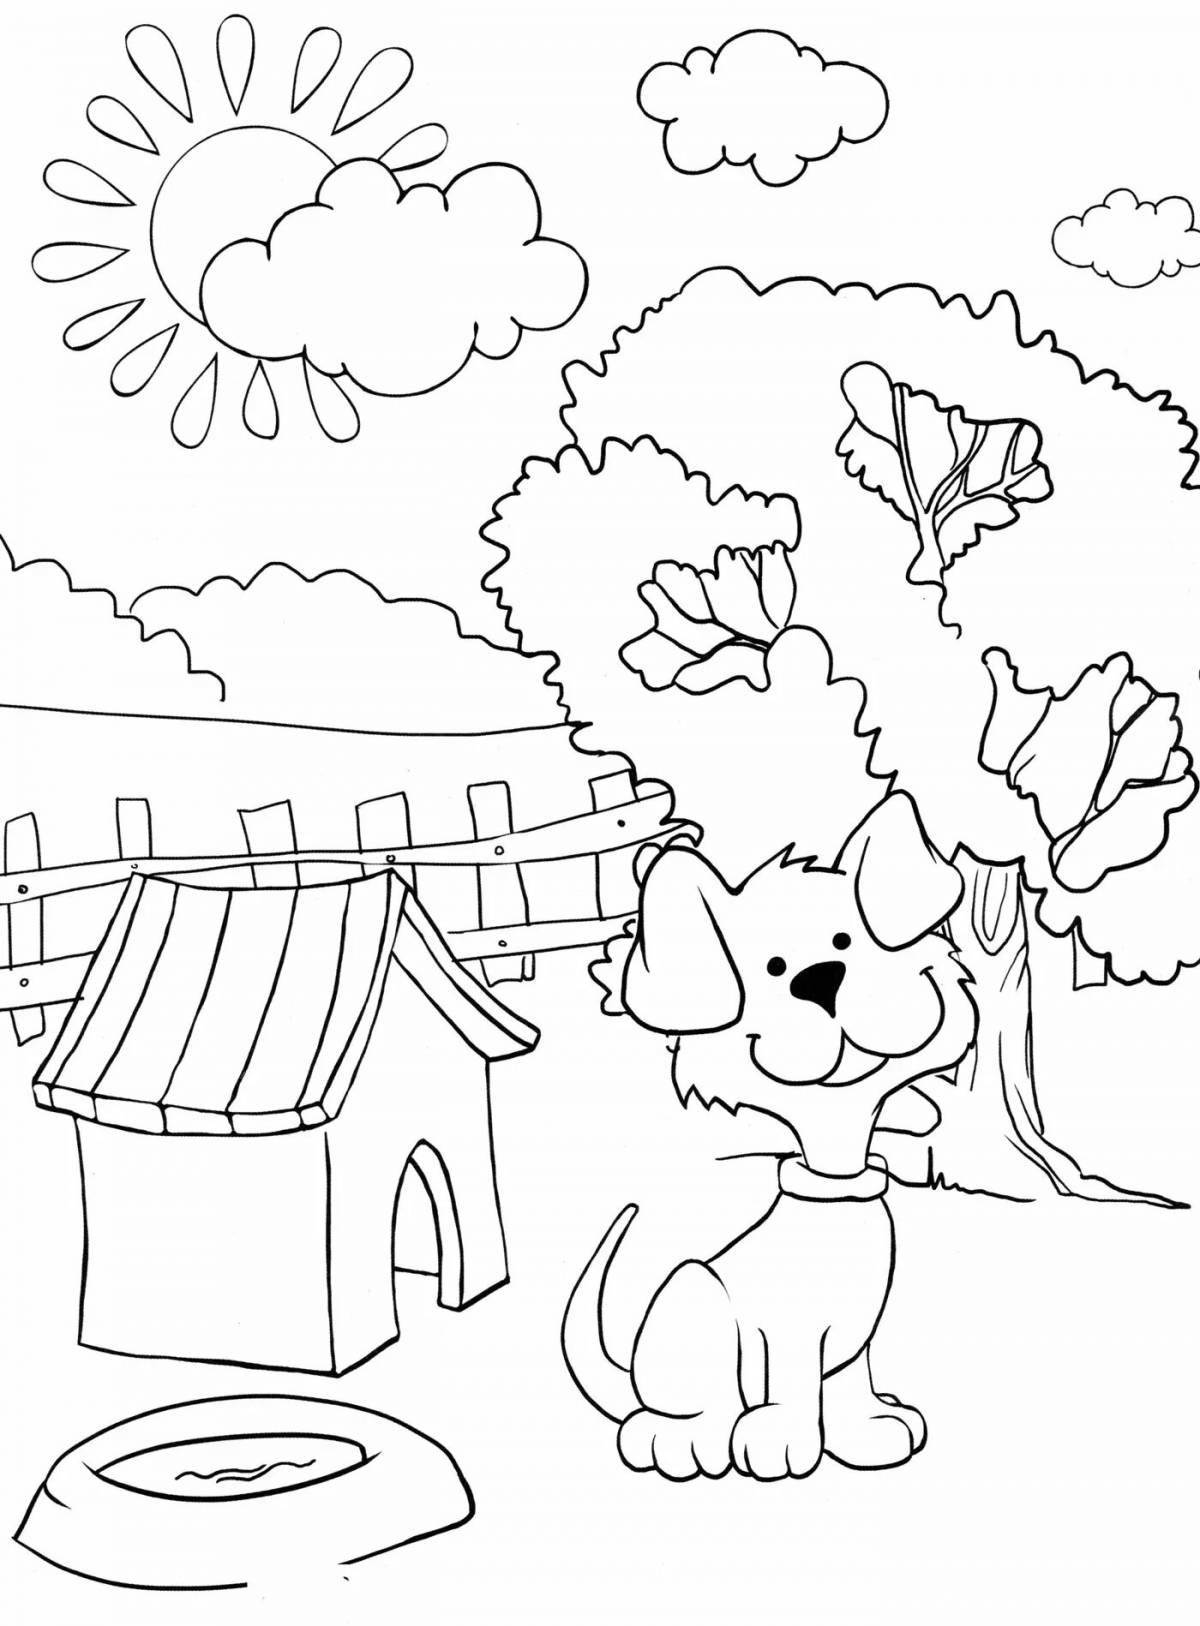 Inviting doghouse coloring page